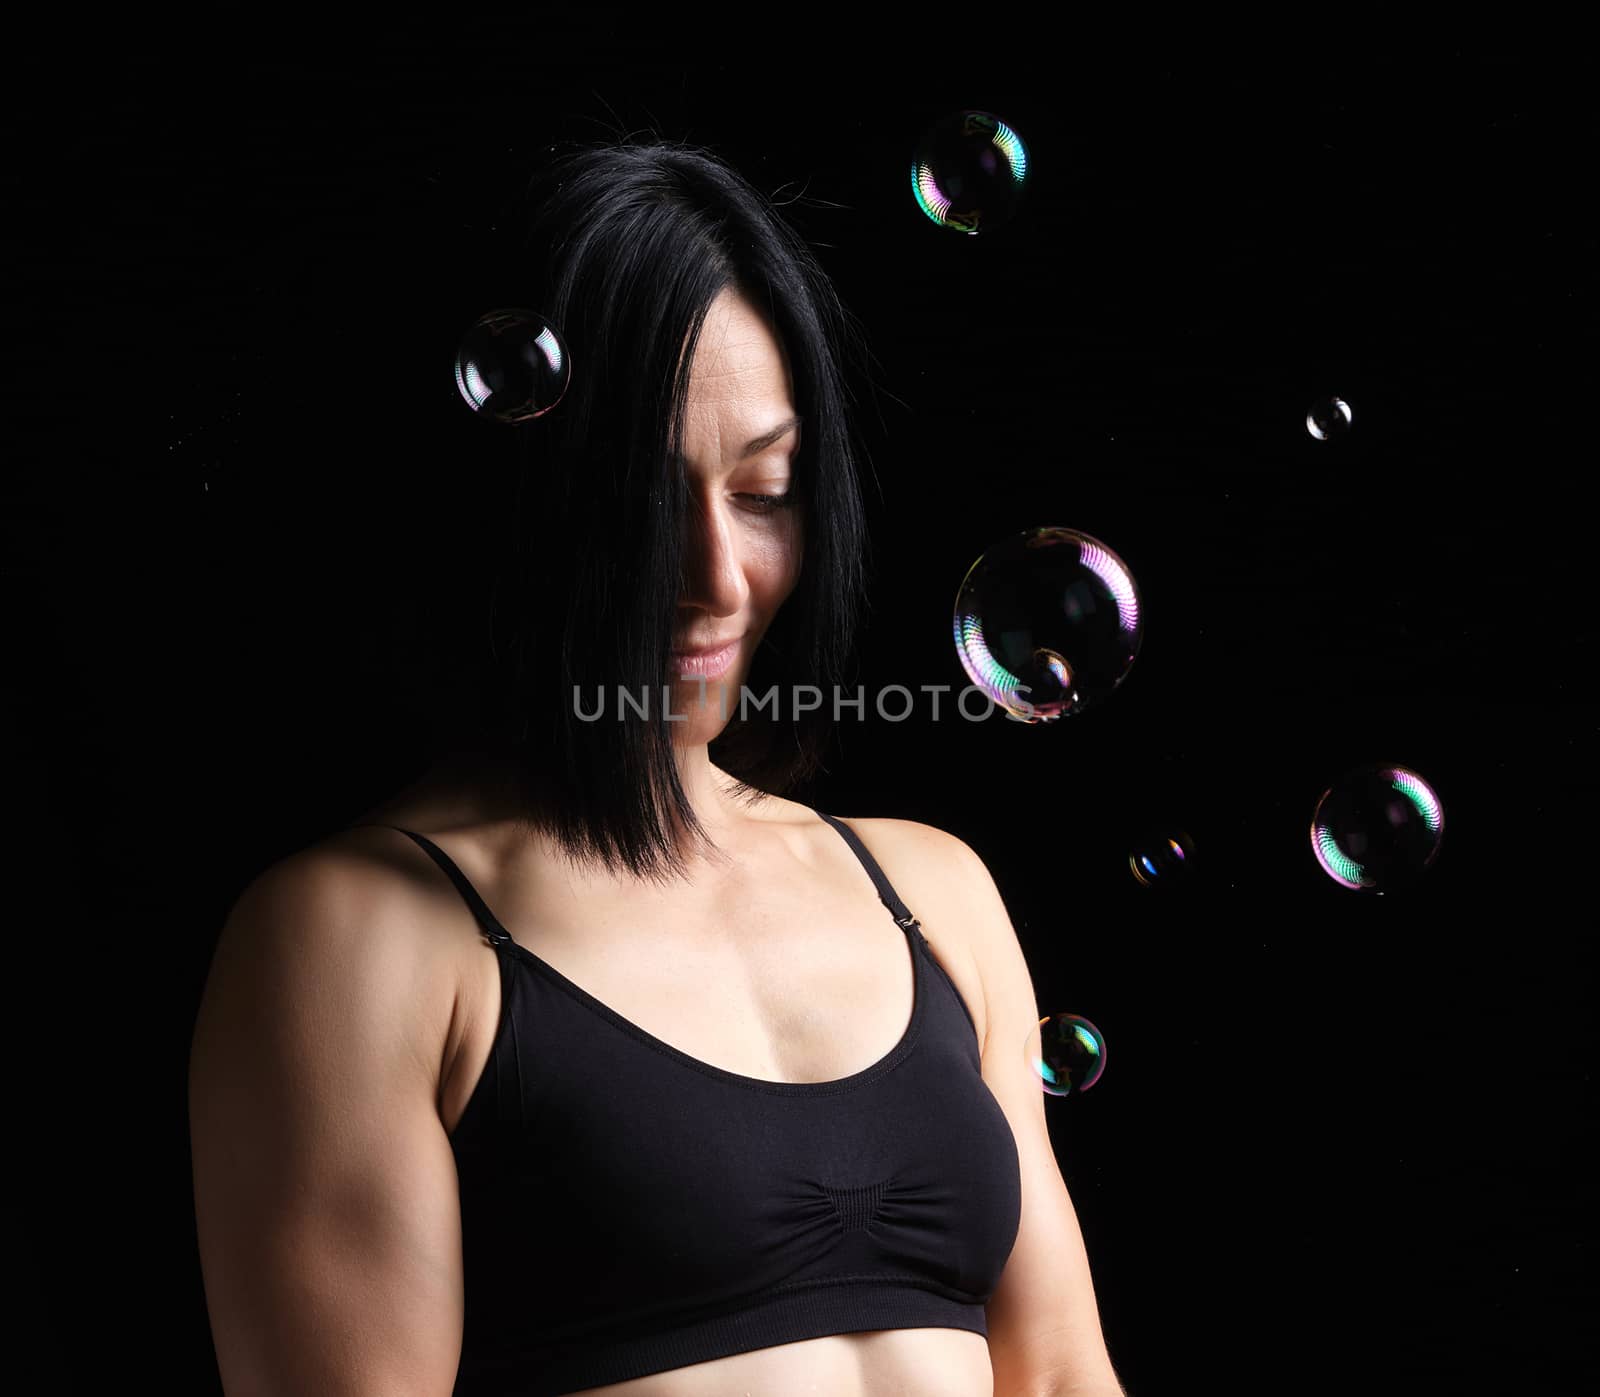 portrait of a young girl with black short hair and a sports figure on a dark background, flying soap bubbles around